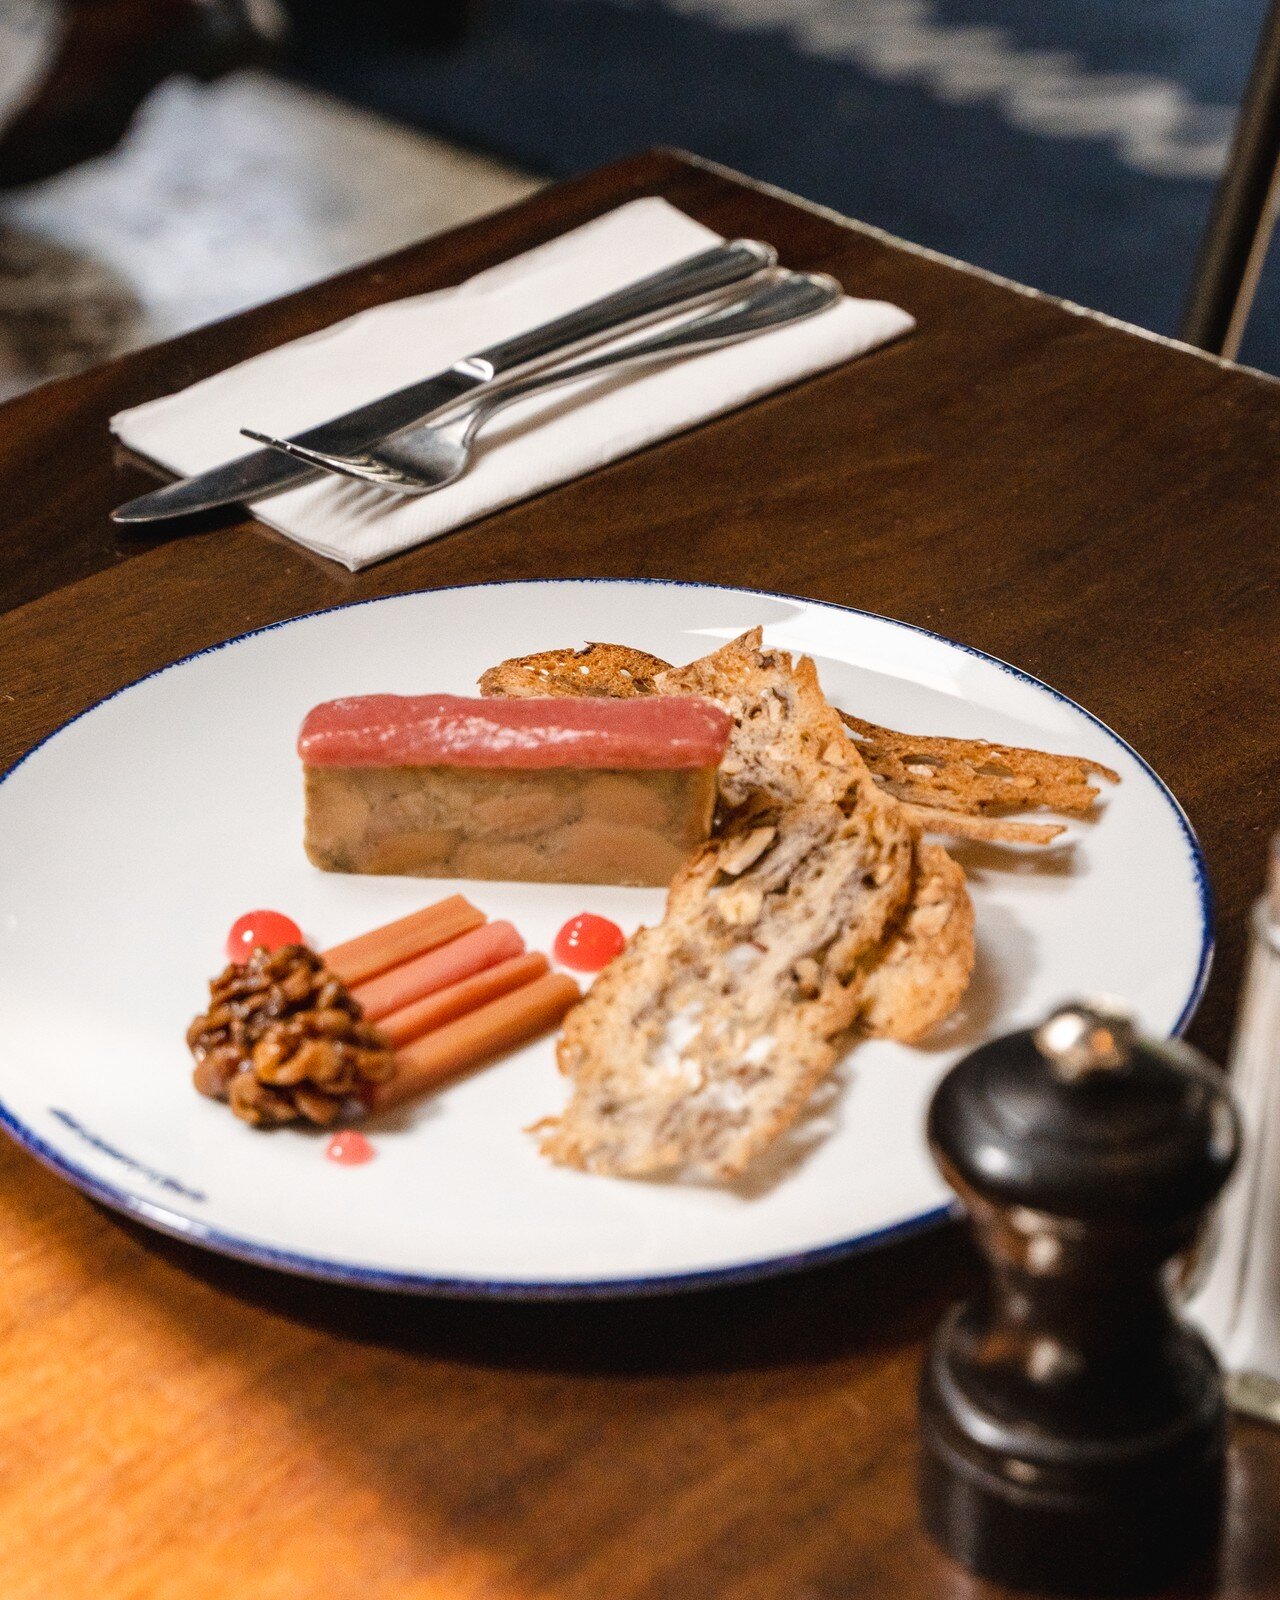 Cool down from the beach with A/C and snacks -- last call at 10 pm tonight.⁠
⁠
Our foie gras &amp; rhubarb terrine served with housemade walnut bread chips.